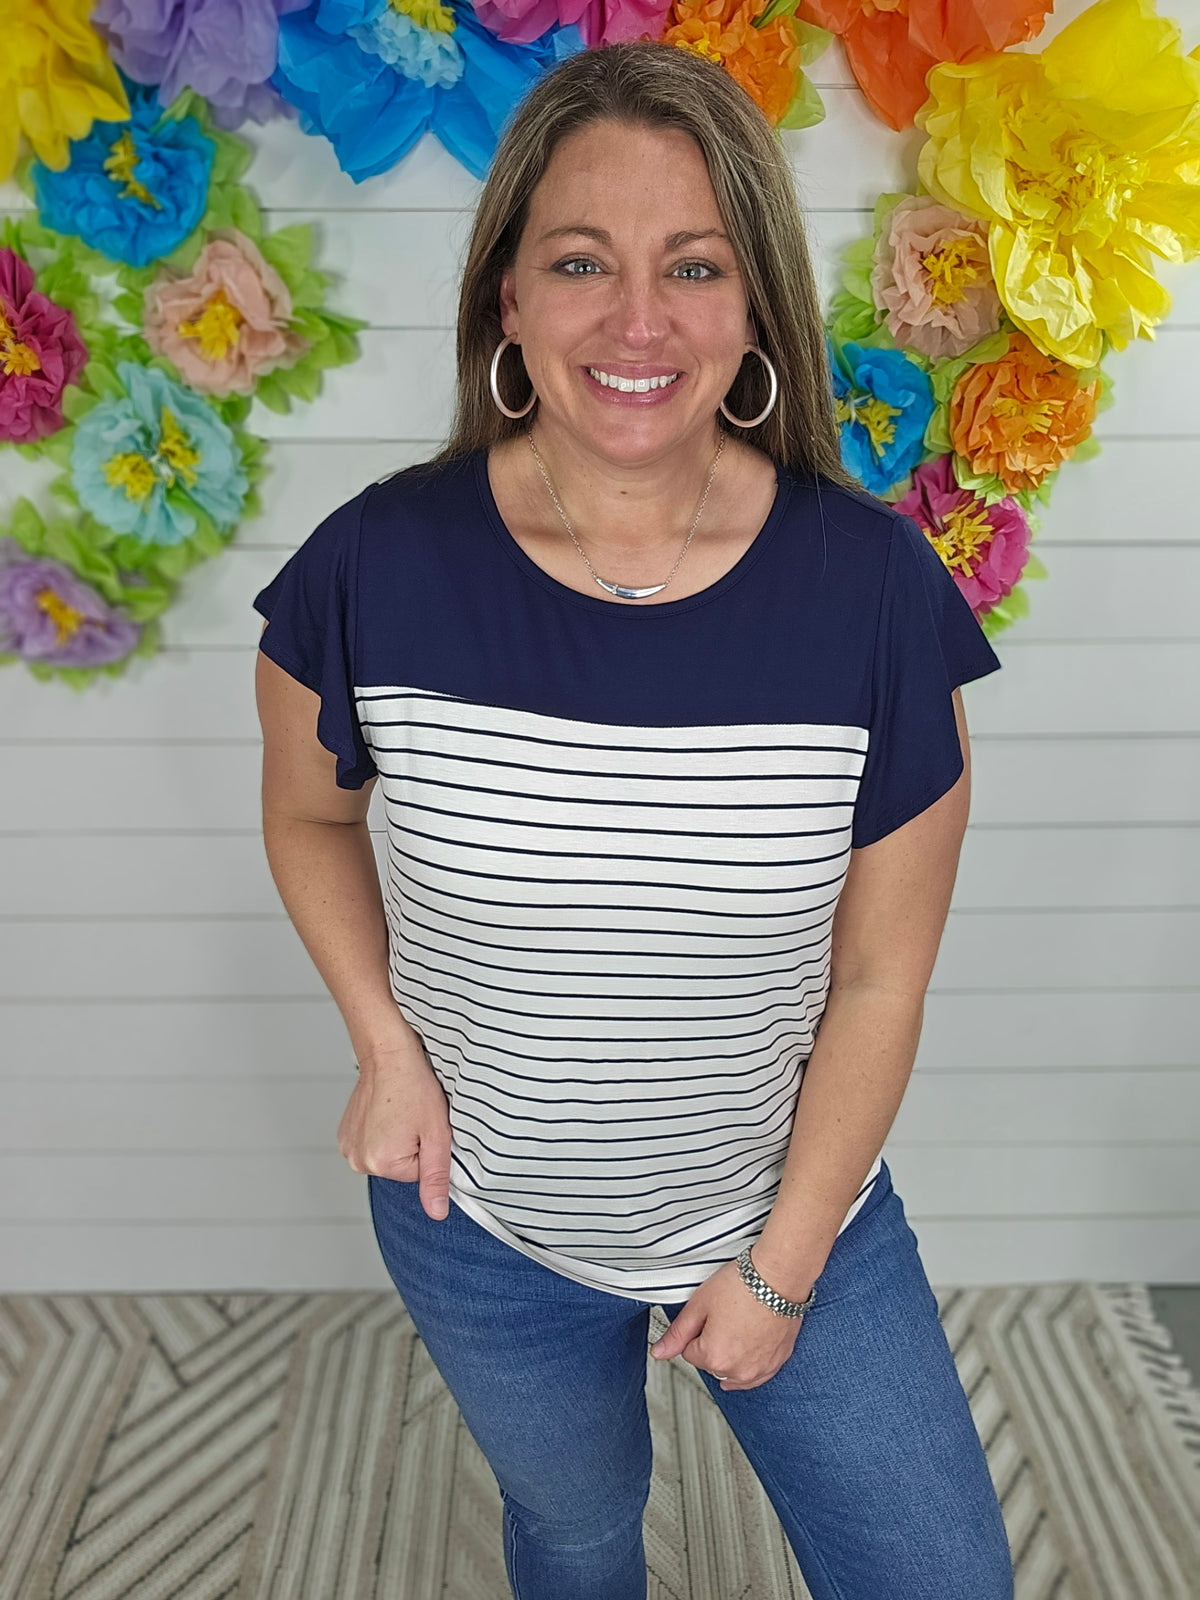 NAVY/STRIPED COLORBLOCK RUFFLE SLEEVE KNIT TOP